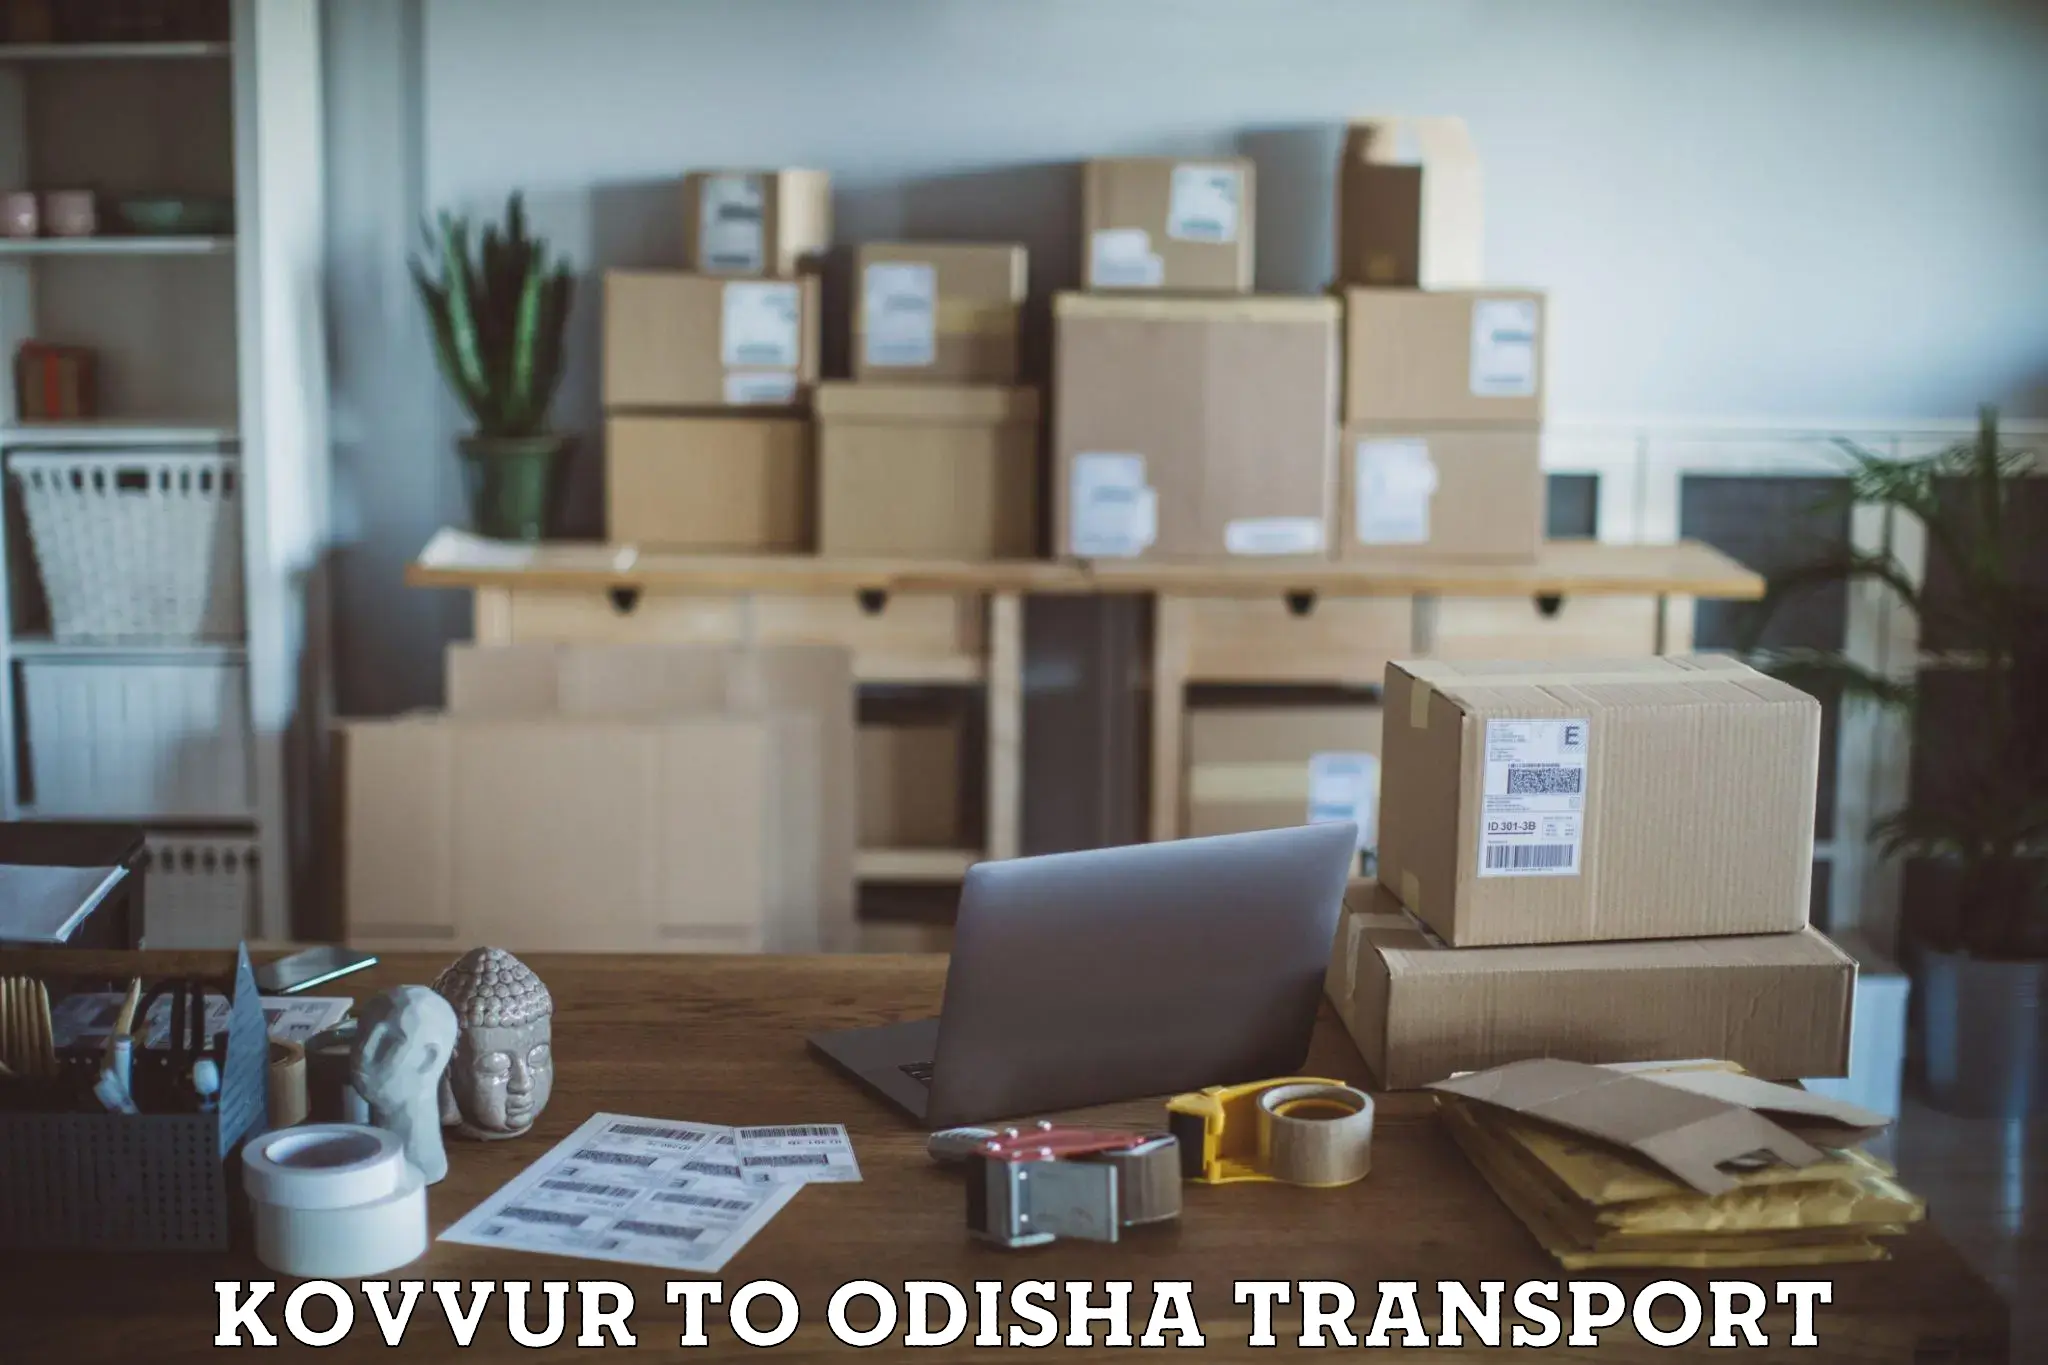 Transport shared services Kovvur to Boudh